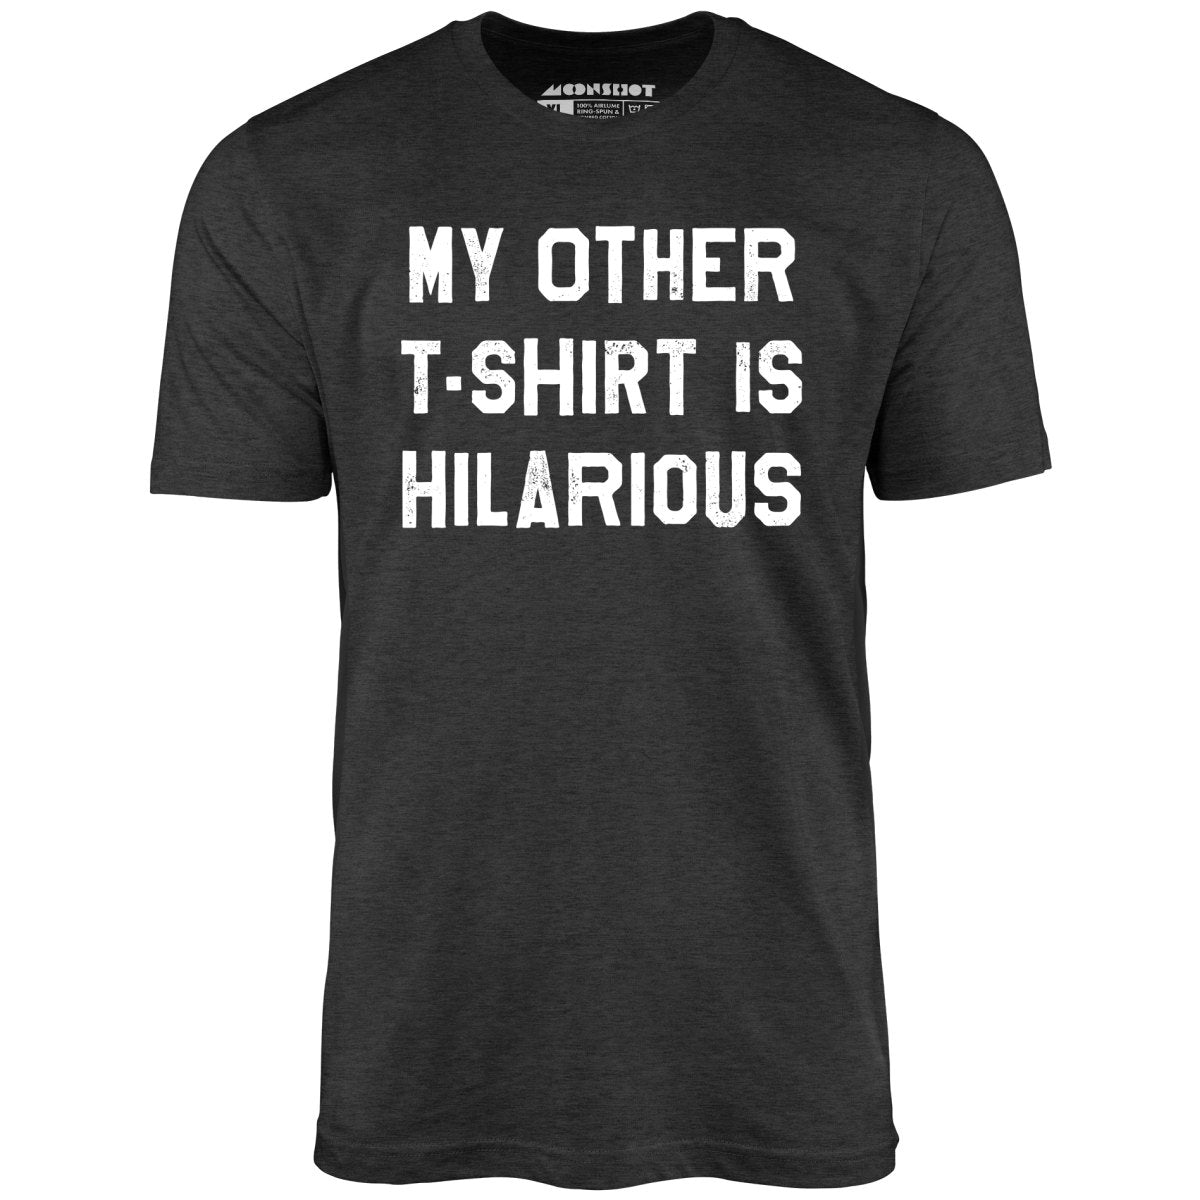 My Other T-Shirt is Hilarious - Unisex T-Shirt